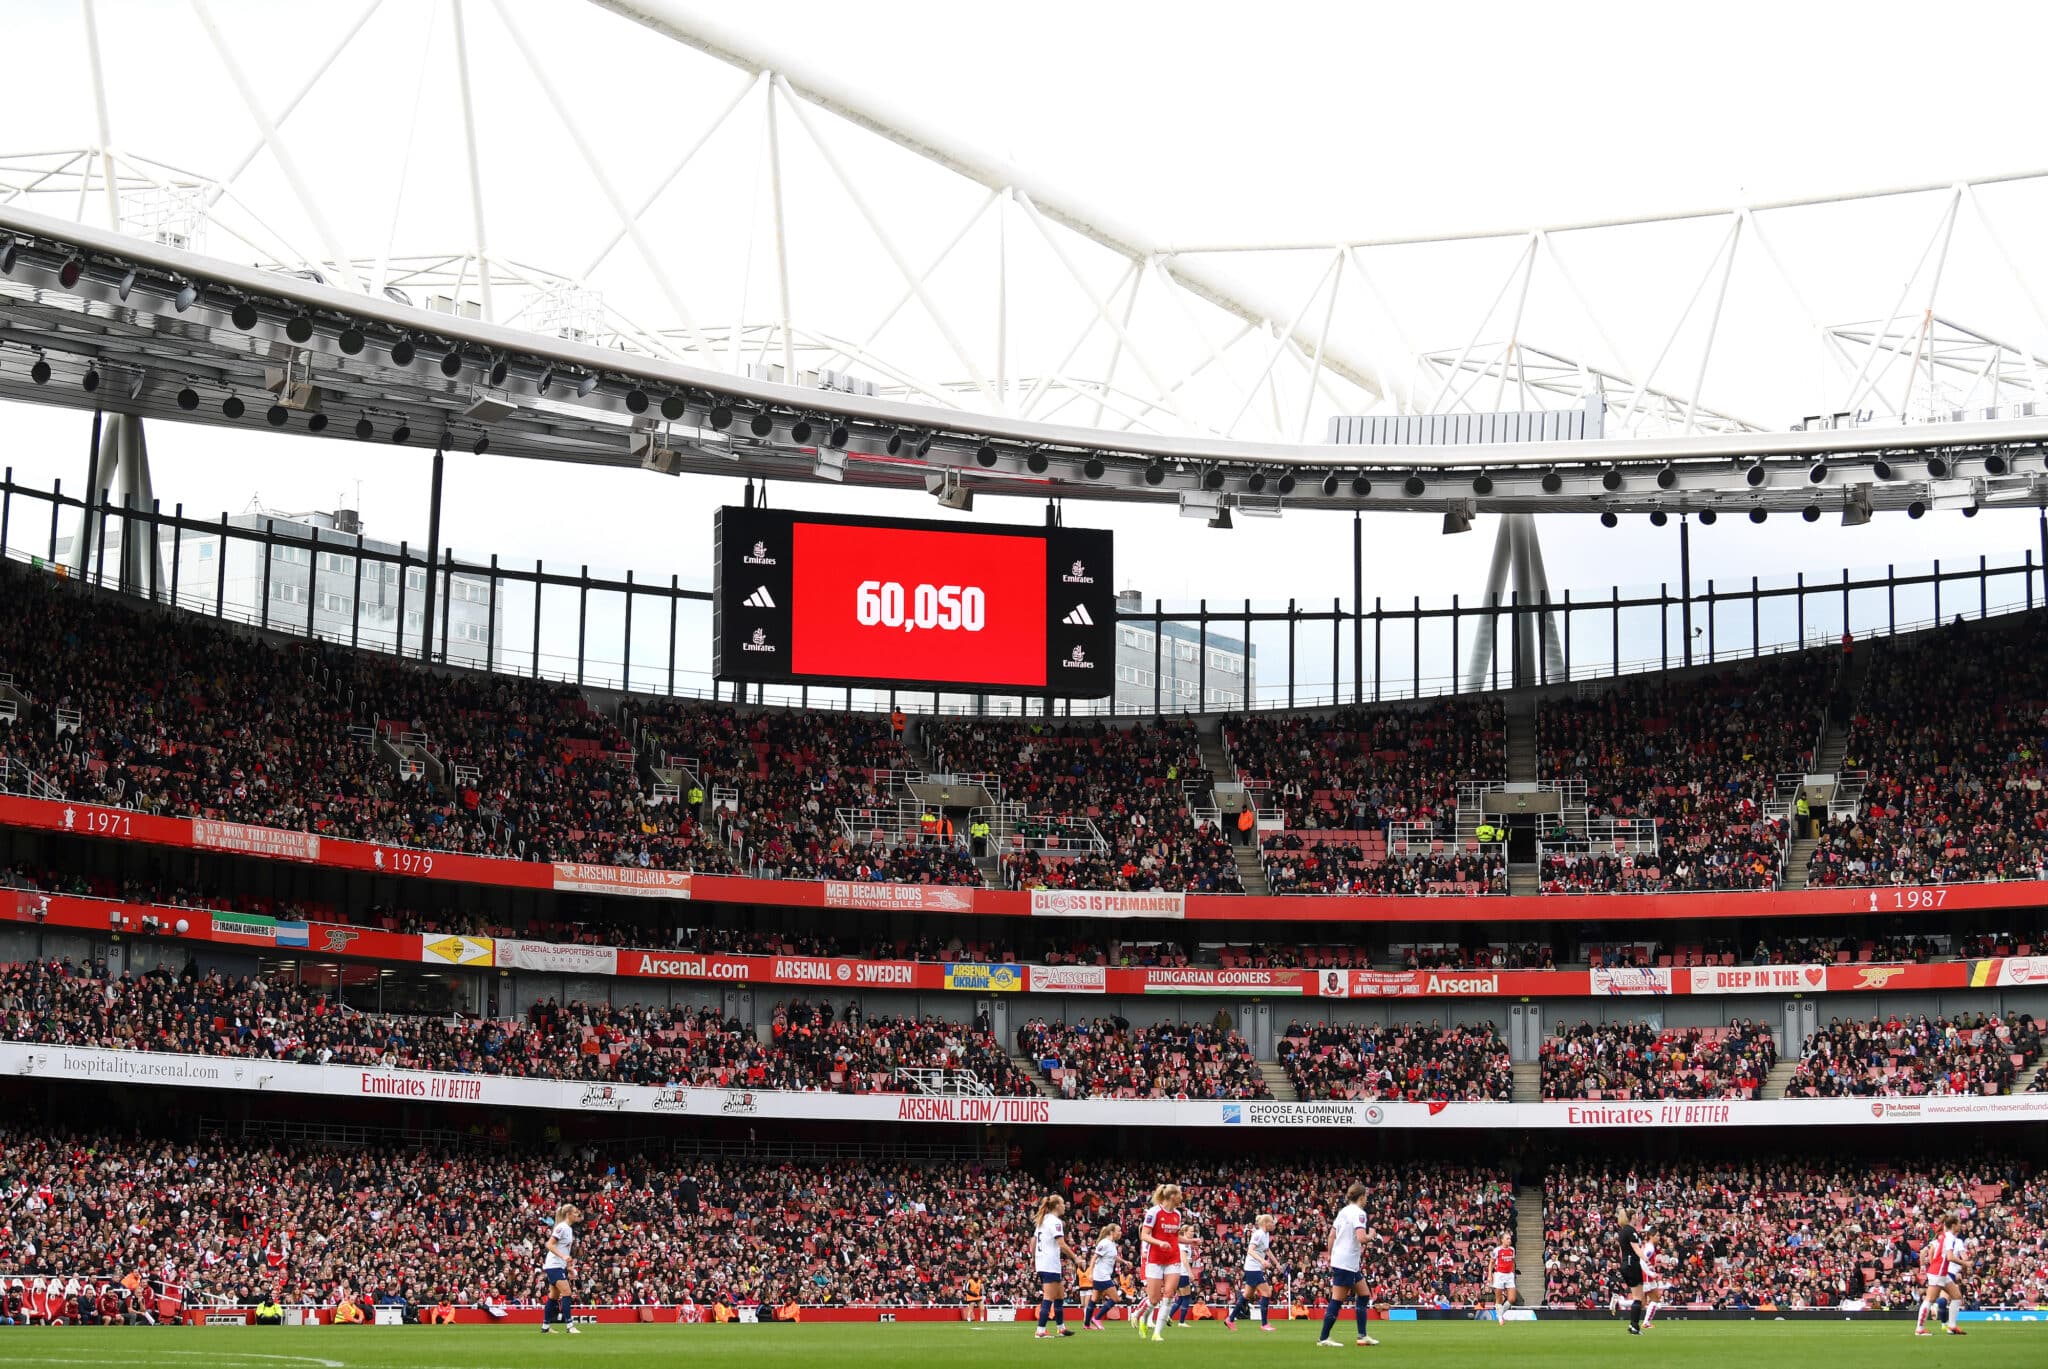 LONDON, ENGLAND - MARCH 03: A general view as the LED Screen displays the match attendance of 